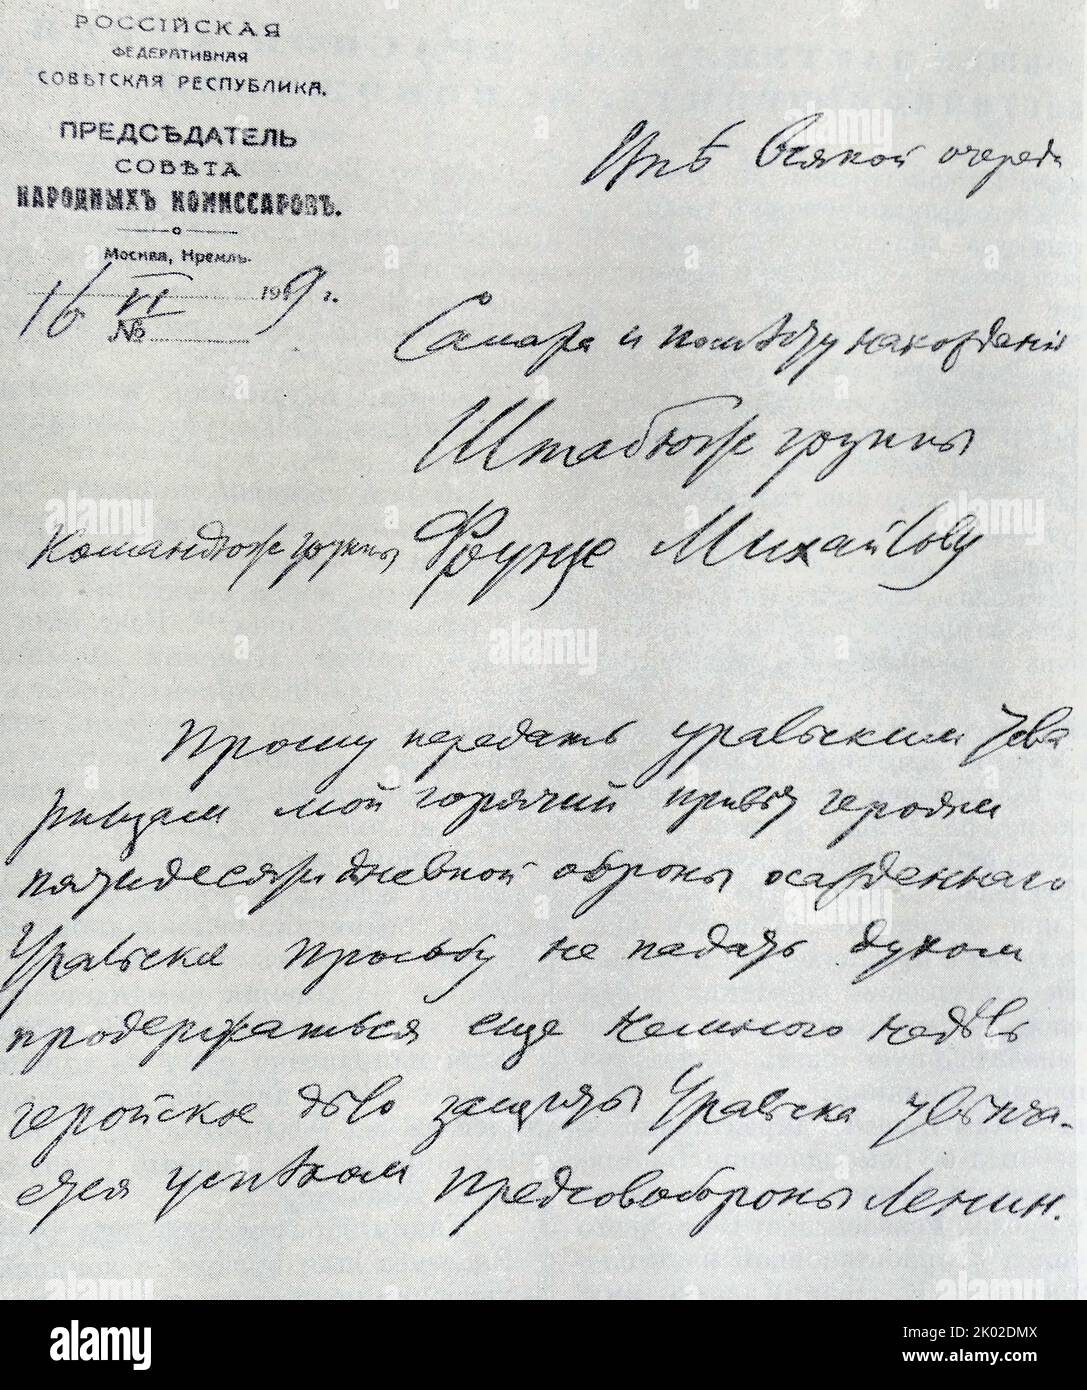 Telegram from the Chairman of the Council of Defense V.I. Lenin to the Commander of the Southern Group of the Eastern Front M.V. Frunze. June 16, 1919. &#13;&#10; Stock Photo